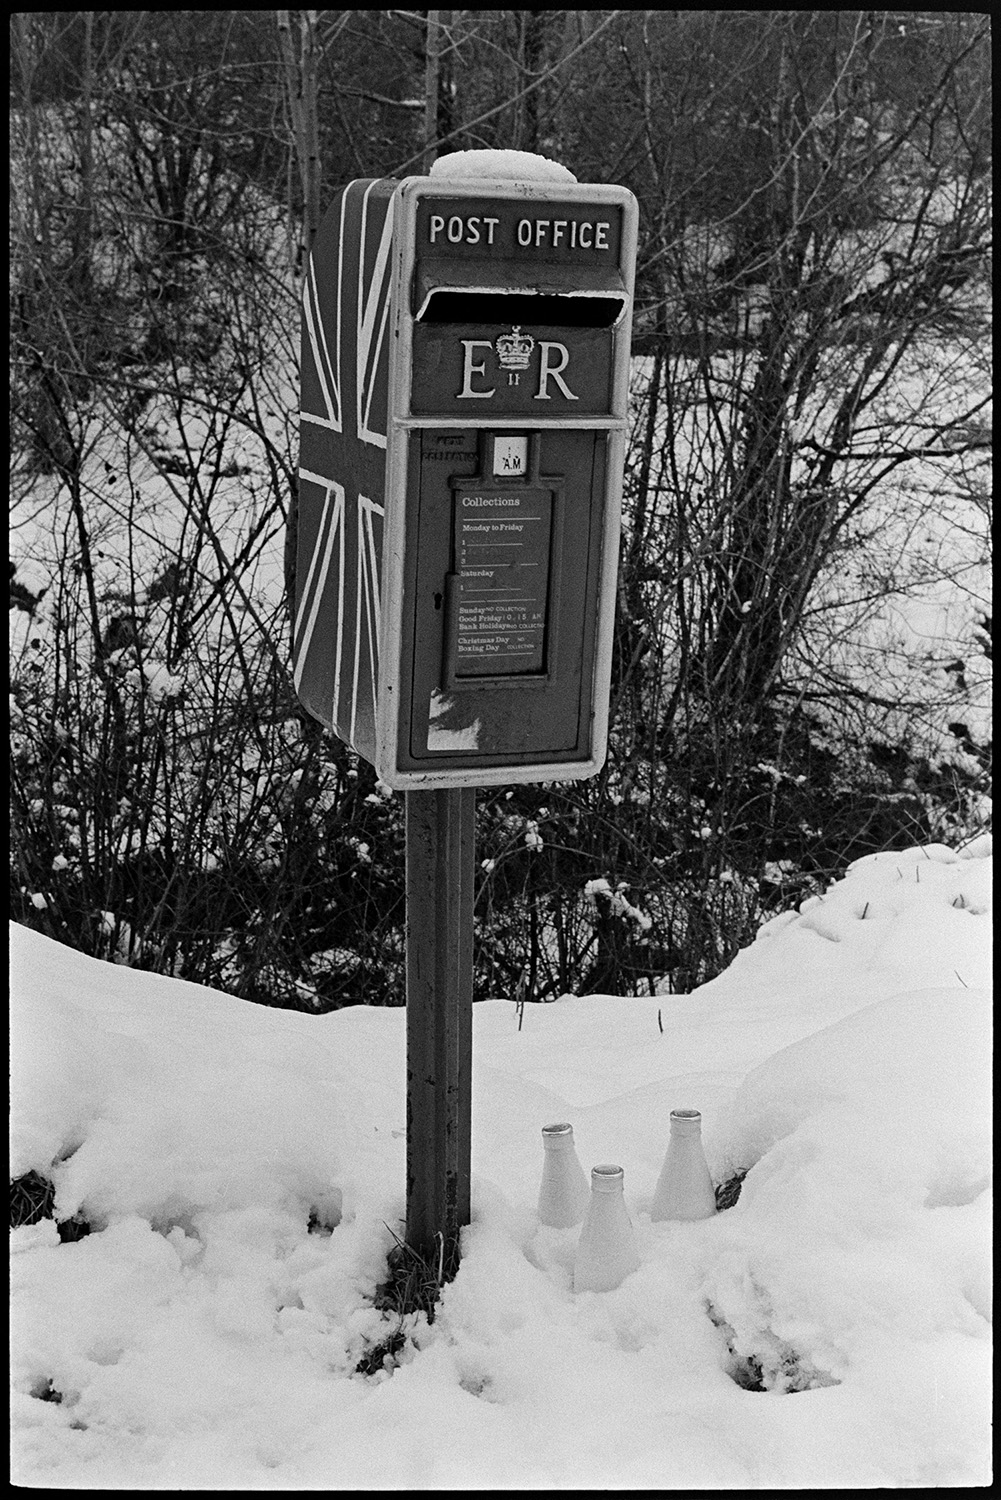 Letter box in snow, painted with flag for Jubilee. 
[A post box covered in snow at Woolridge Cross, Dolton. It has been painted with a Union Jack to celebrate the Silver Jubilee of Queen Elizabeth II the year before. Three milk bottles are stood in the snow under the post box.]